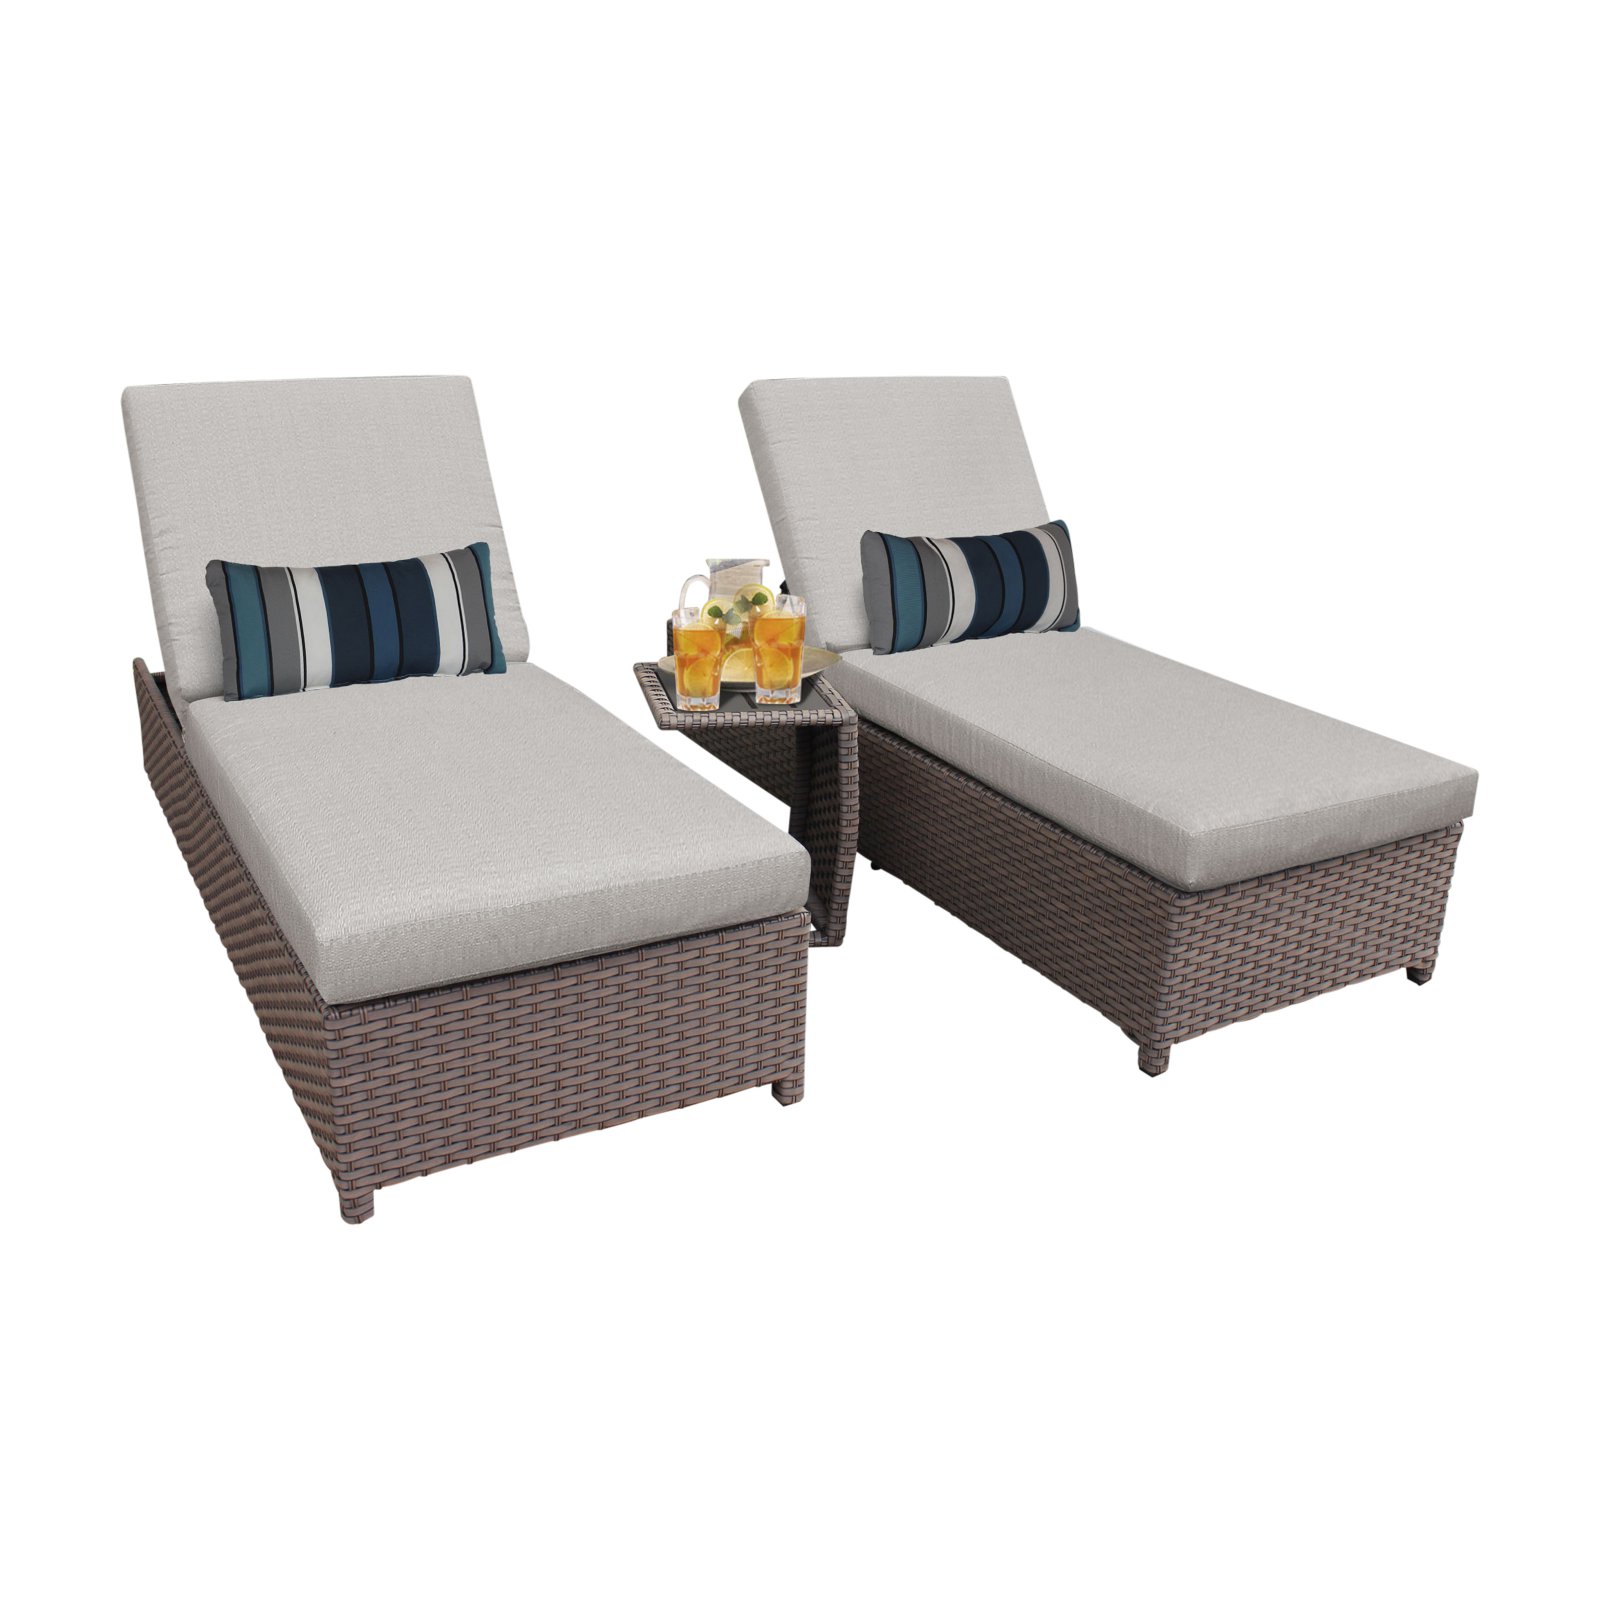 TK Classics Florence 3 Piece Wheeled Wicker Outdoor Chaise Lounge Set - image 1 of 11